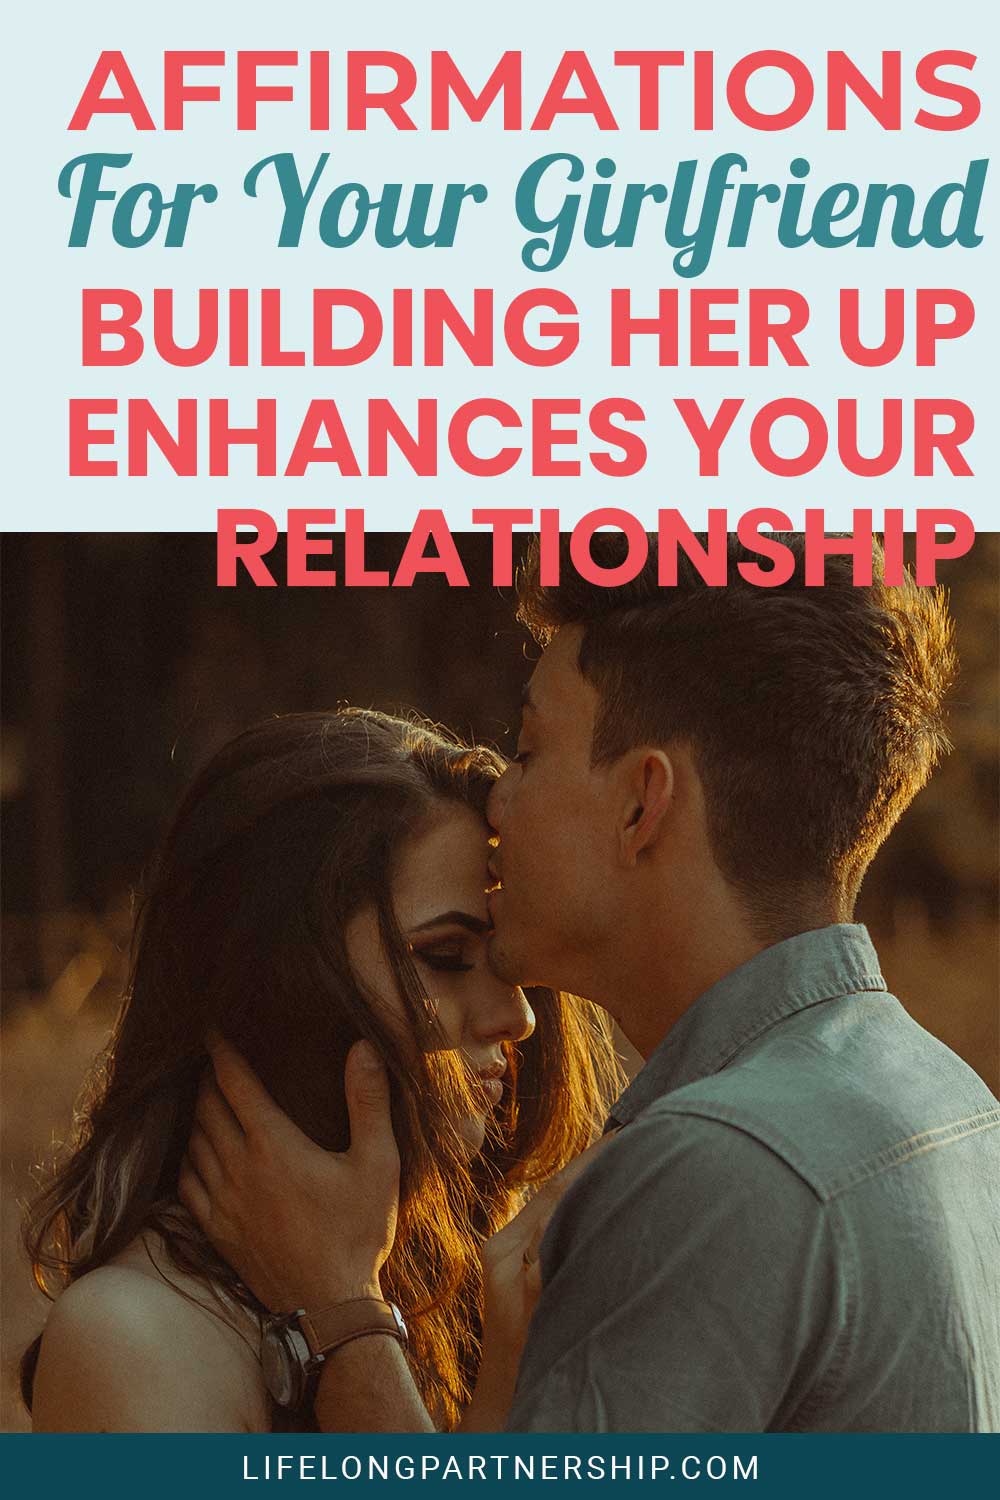 Man kissing on his girlfriend's forehead - Affirmations For Your Girlfriend – Building Her Up Enhances Your Relationship